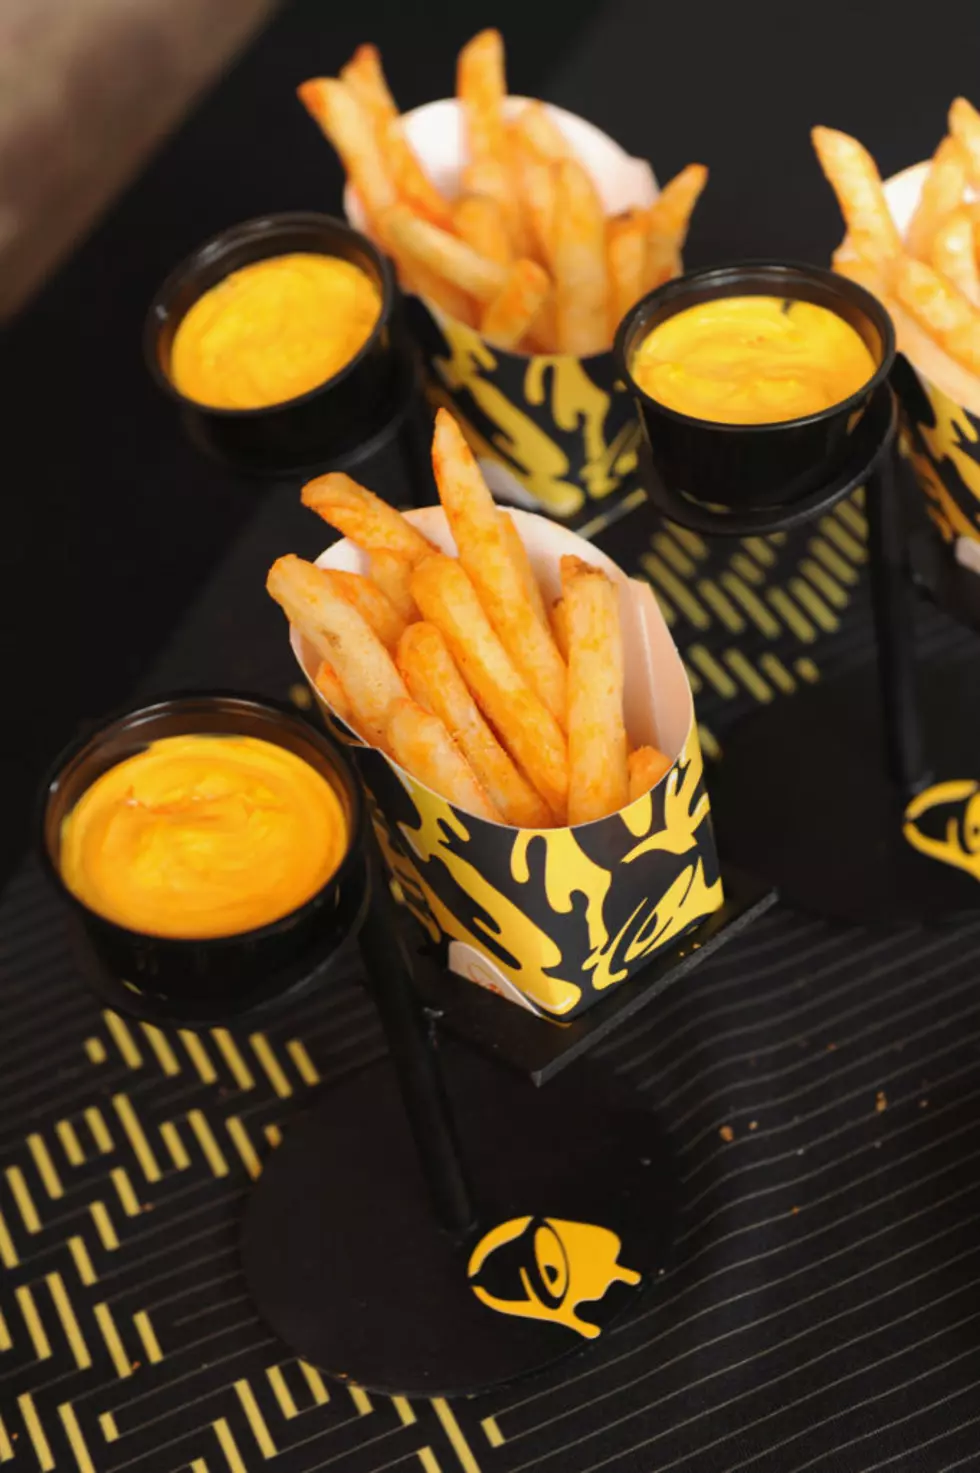 Nacho Fries And Other West Michigan Fast Food Guilty Pleasures